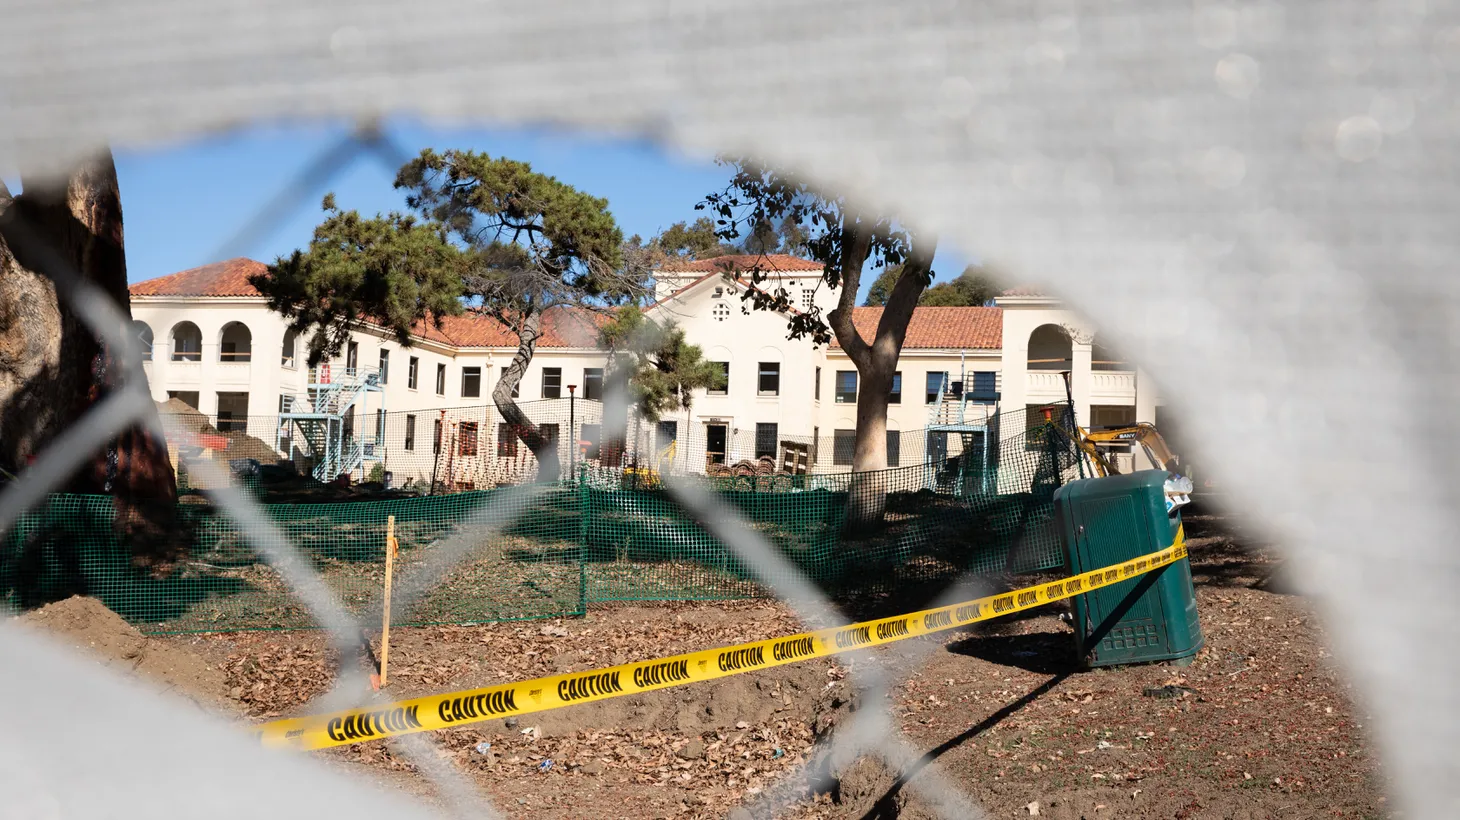 A building is under renovation at the VA campus in West LA, which is at the center of a new lawsuit filed against the federal government by homeless veterans in LA. The VA was supposed to have finished more than 700 apartments there by now, but has opened just 54.